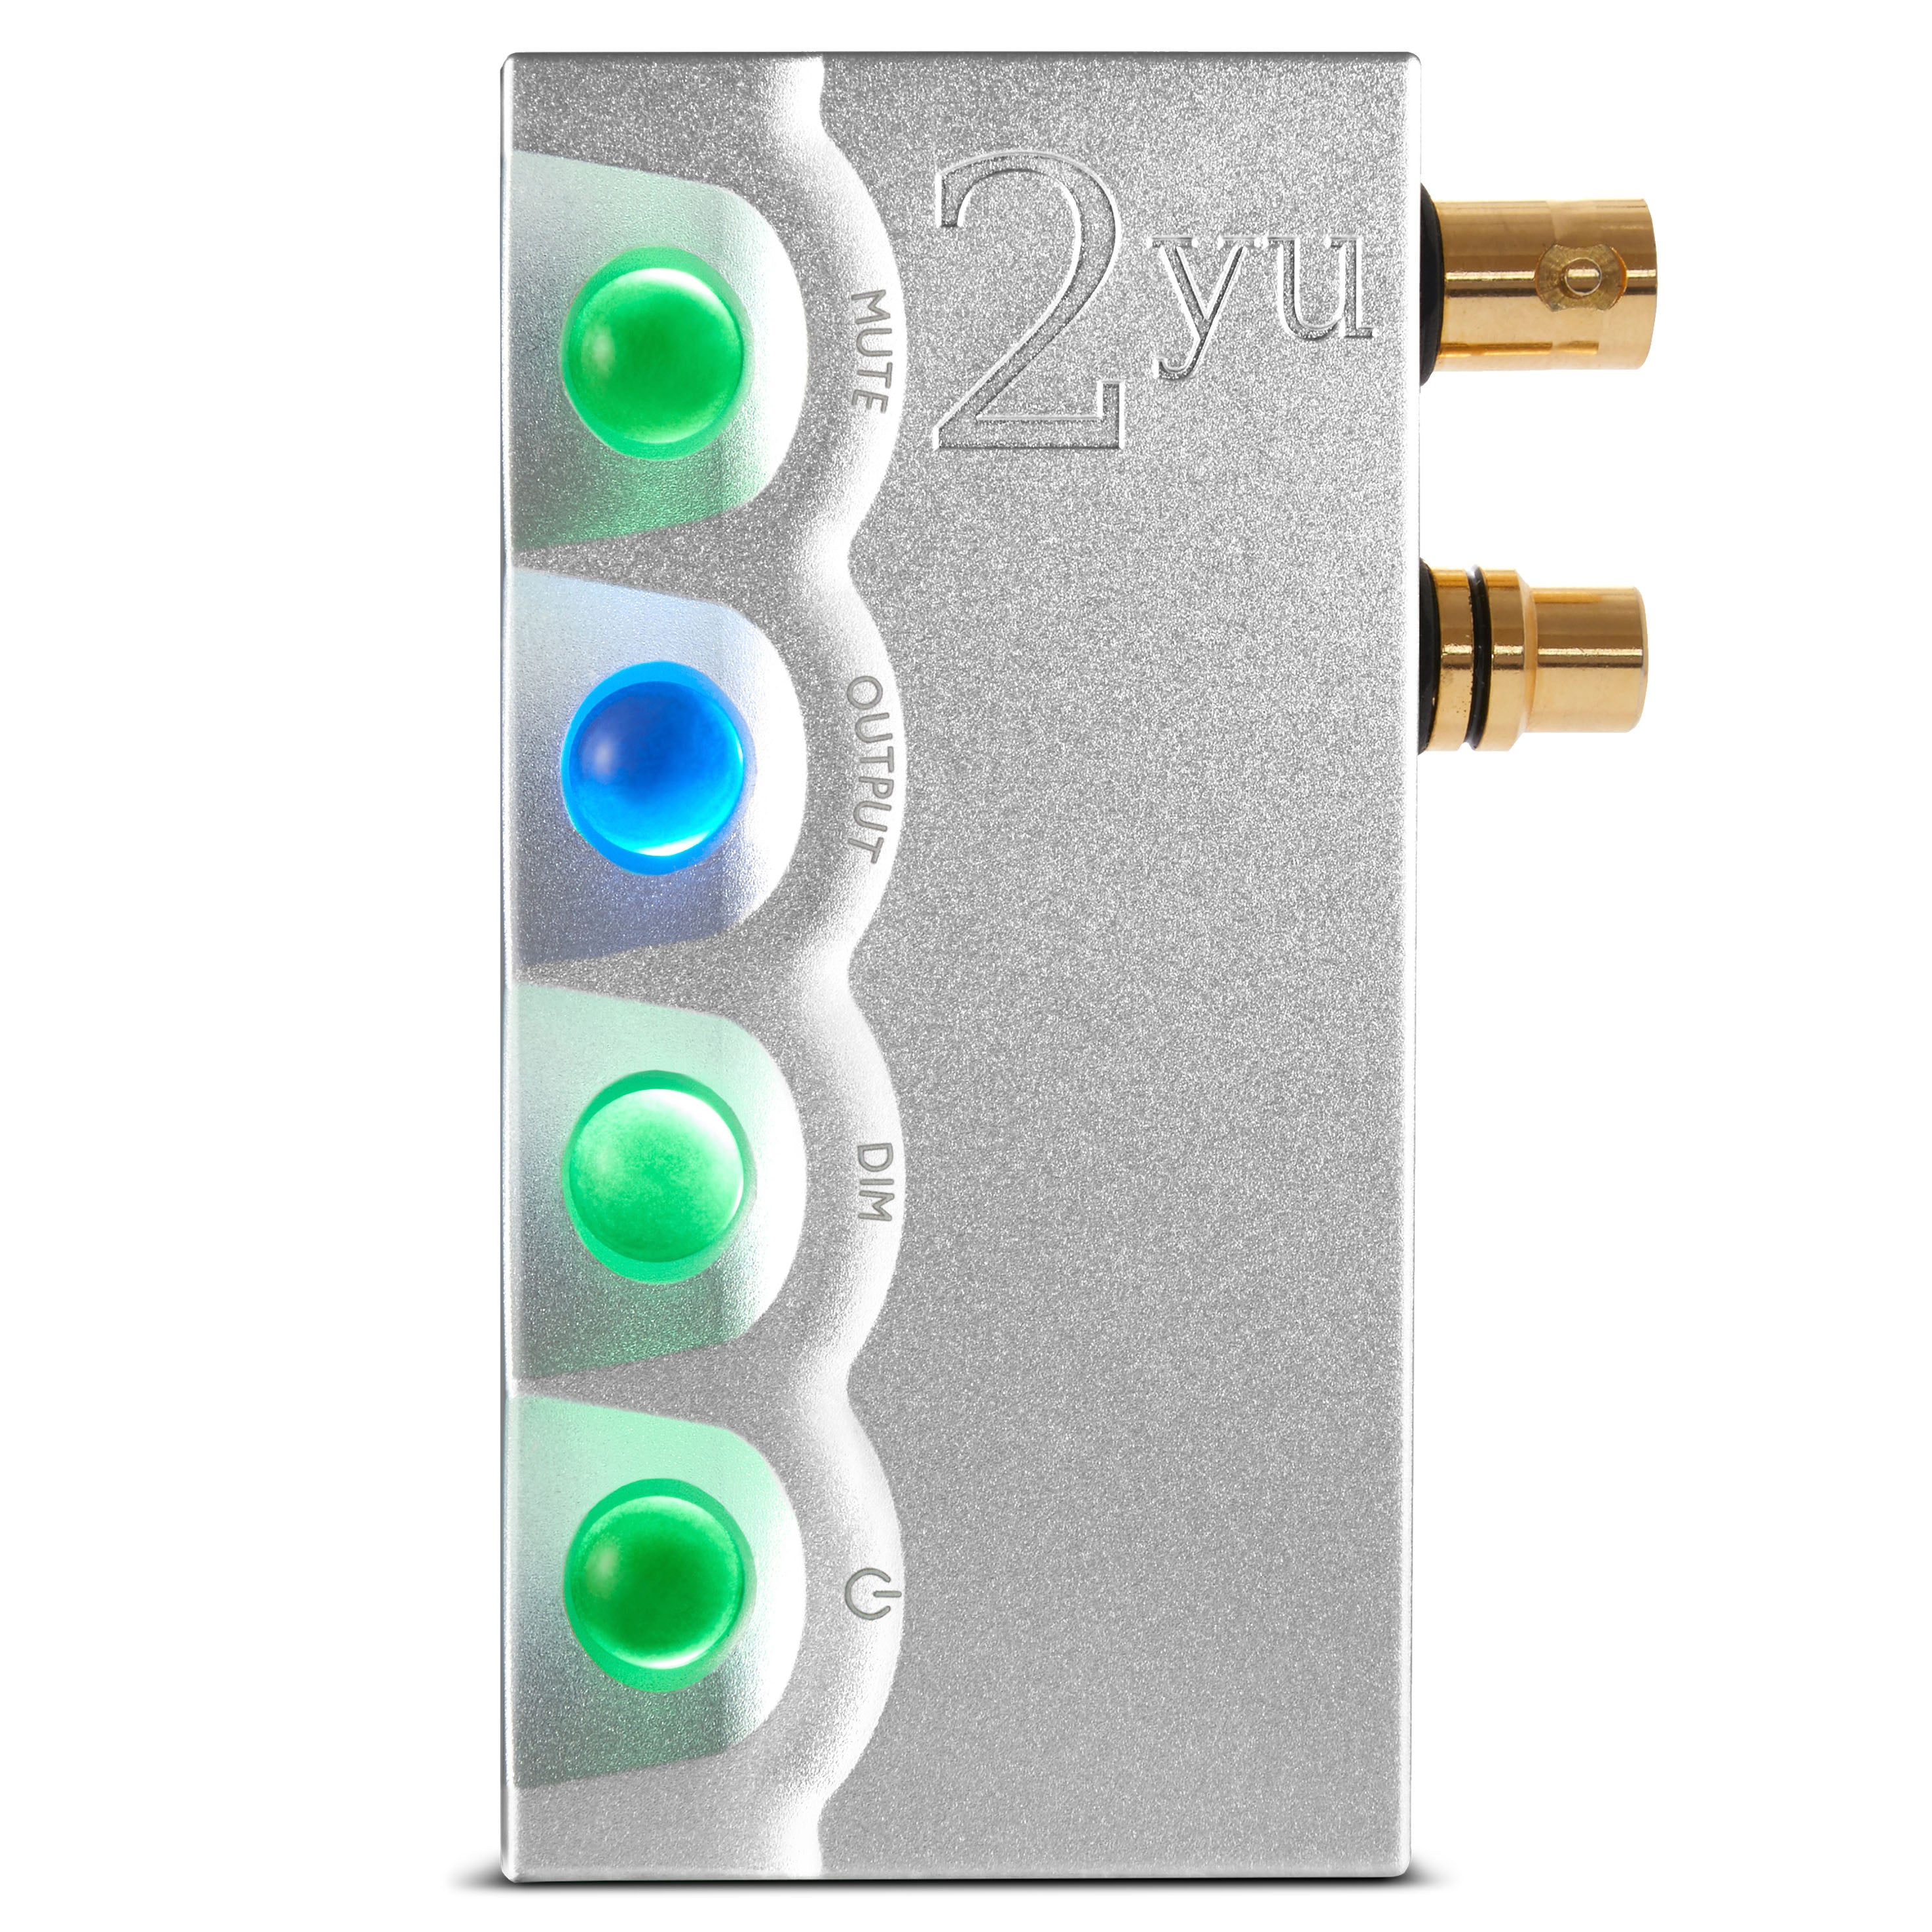 Chord 2yu Musically transparent audio interface for 2go